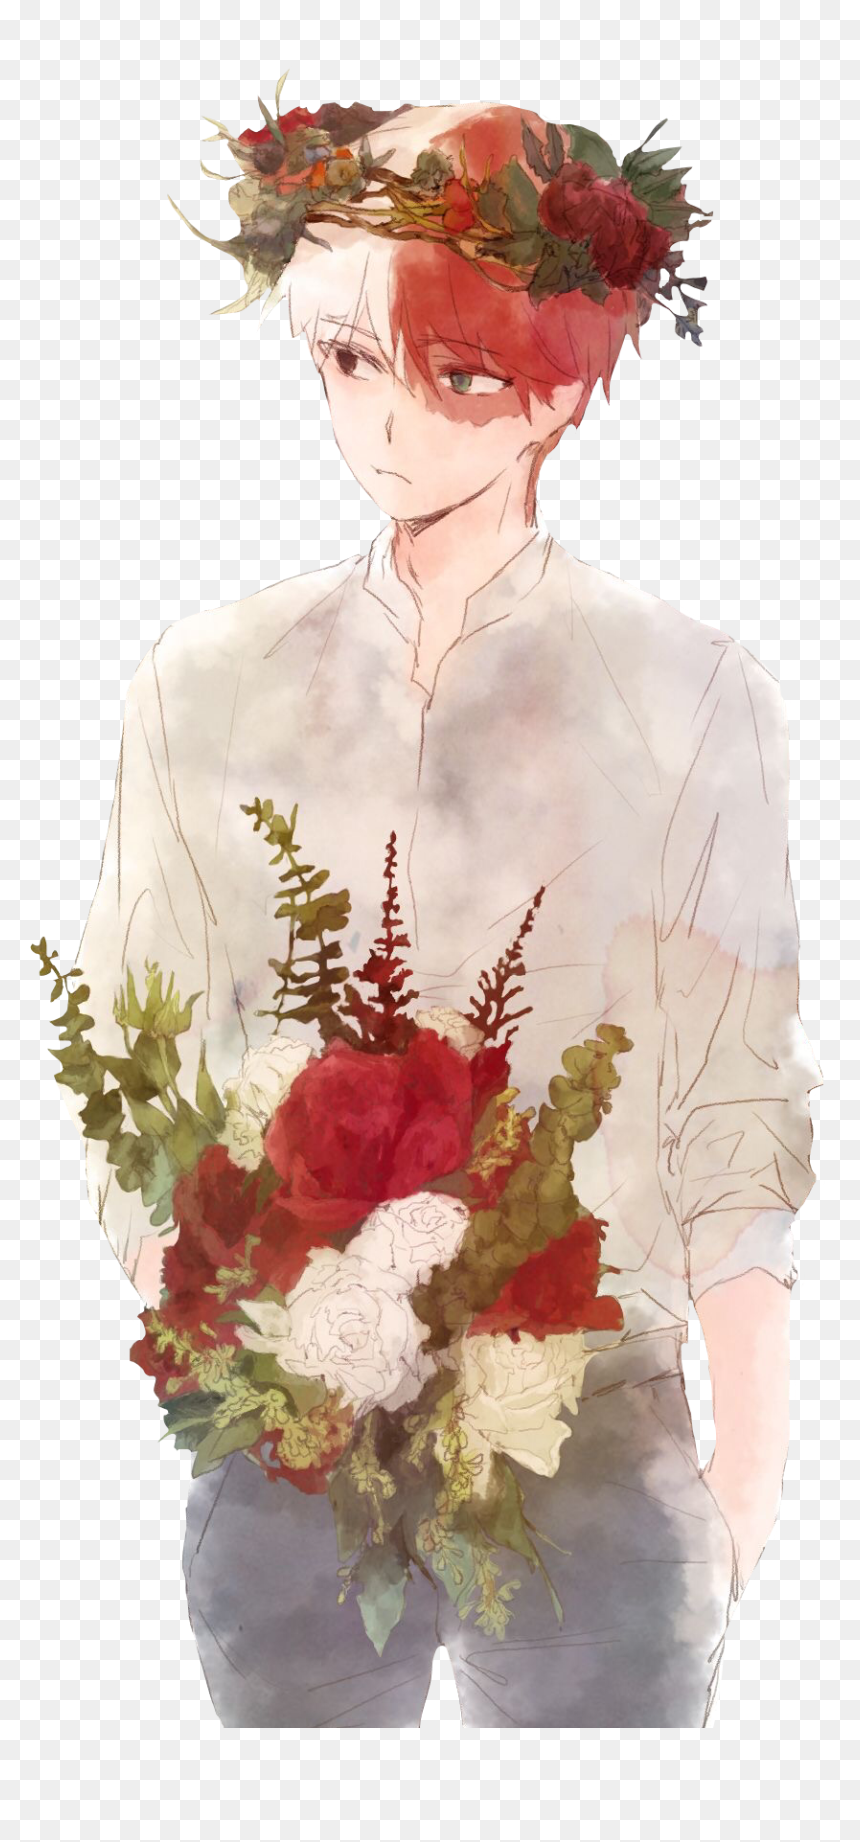 Todoroki Shouto Flowers, Png Download In A Flower Crown, Transparent Png shouto png PNG, Transparent Clipart (835*1762) Image on uokpl.rs